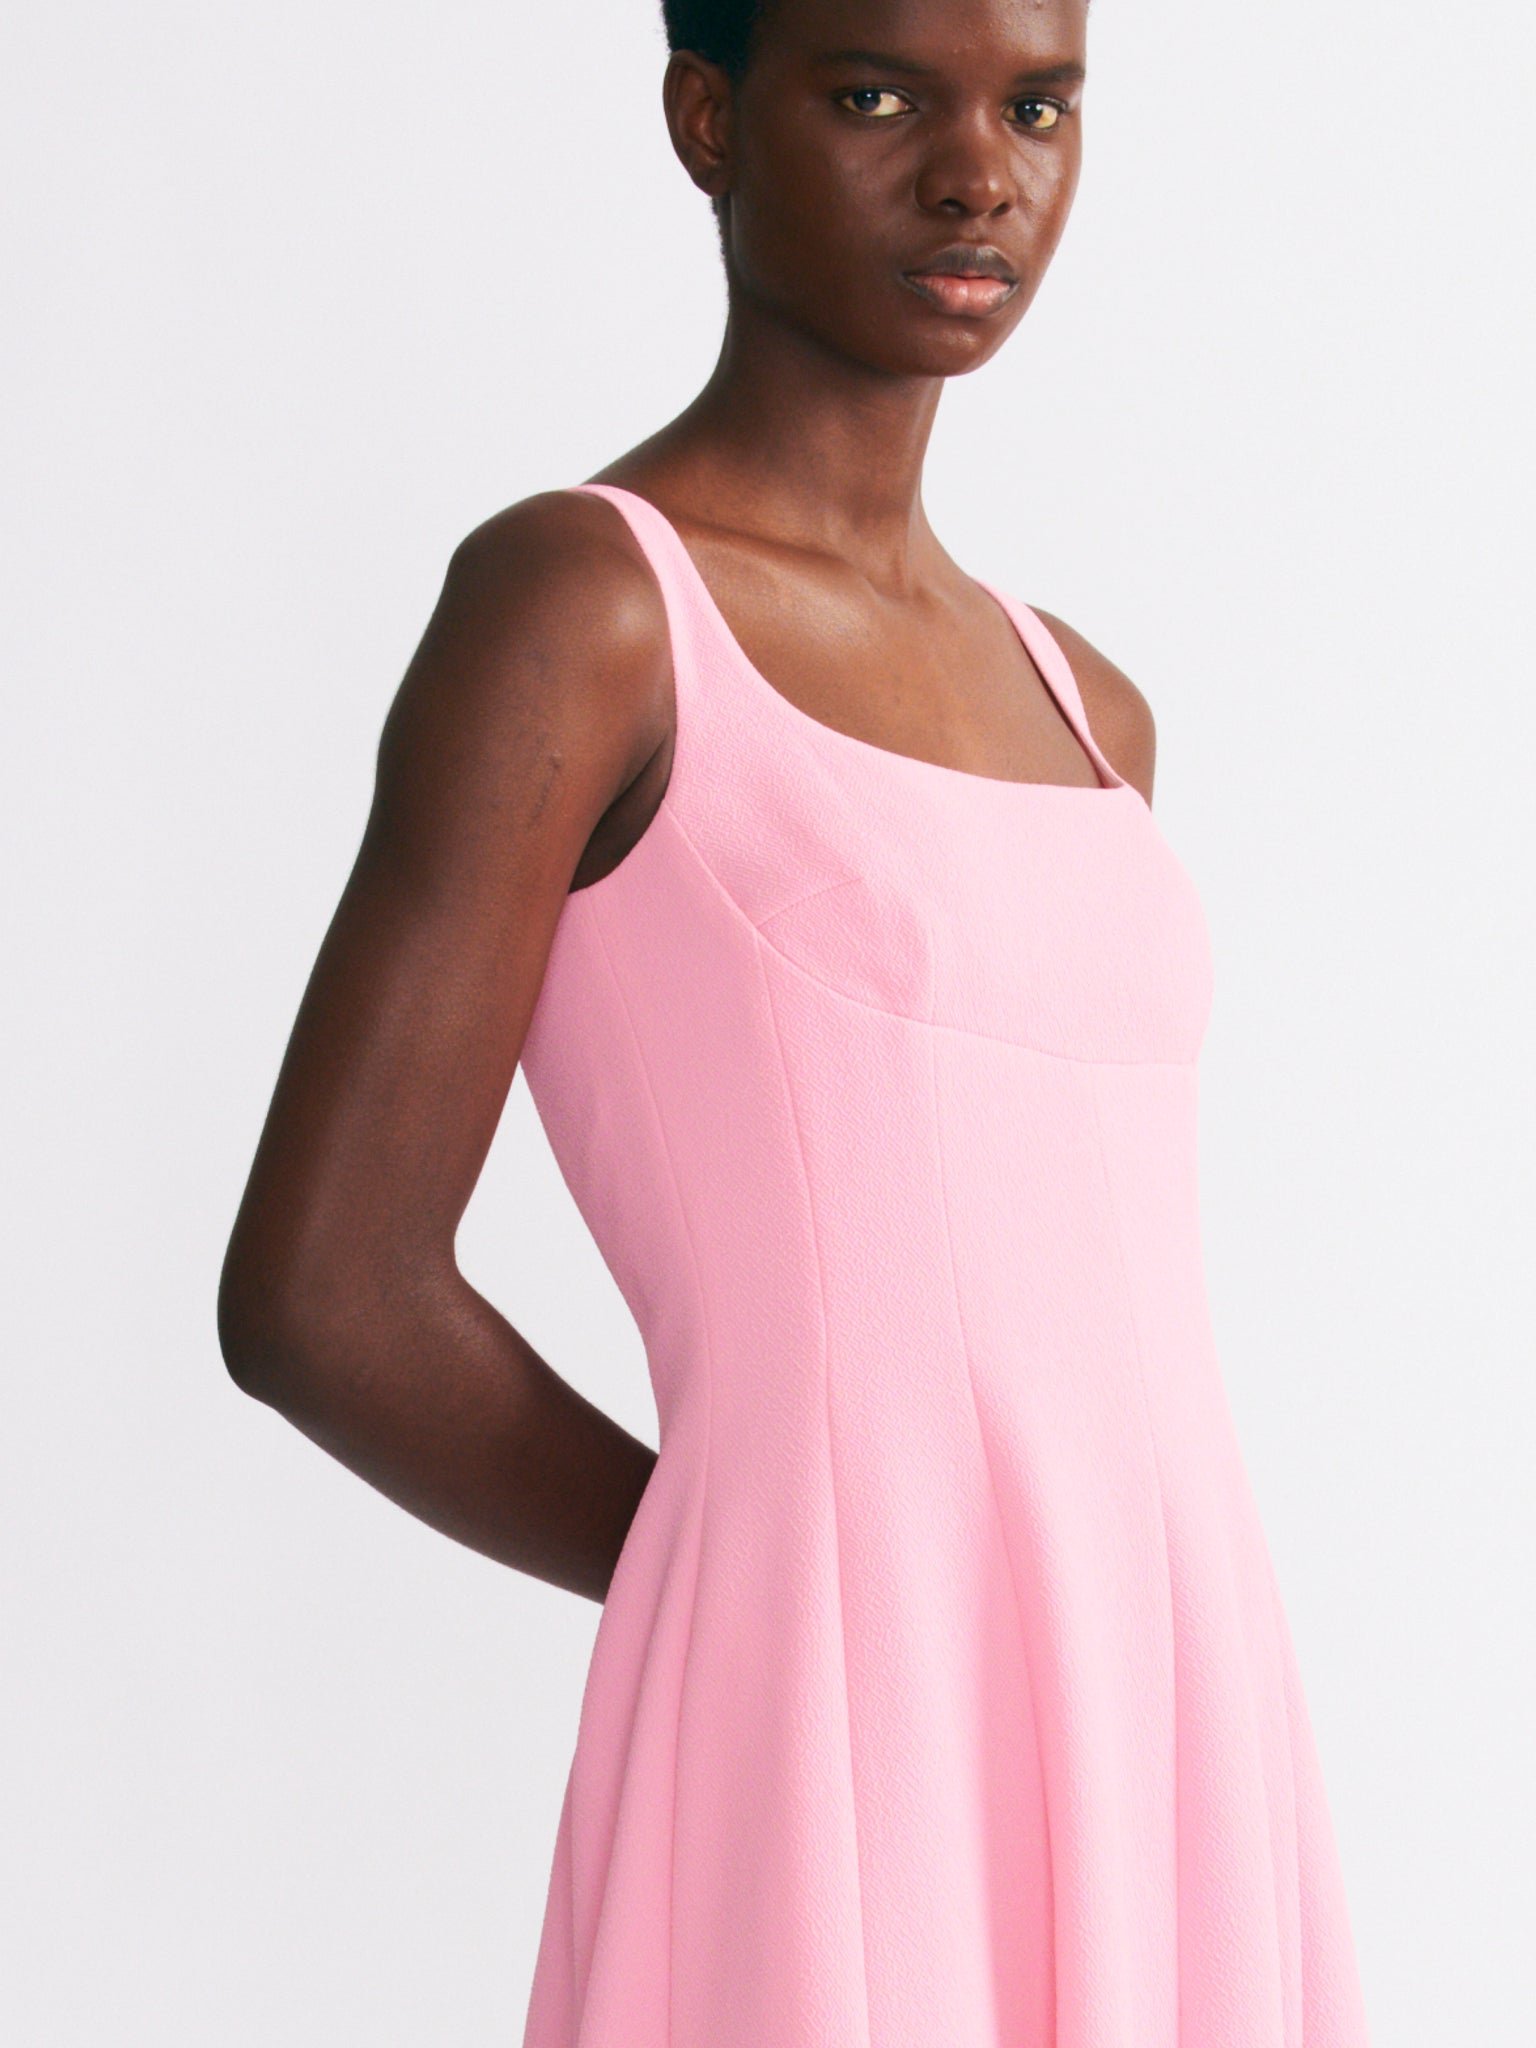 Asia Dress In Pink Double Crepe | Emilia Wickstead